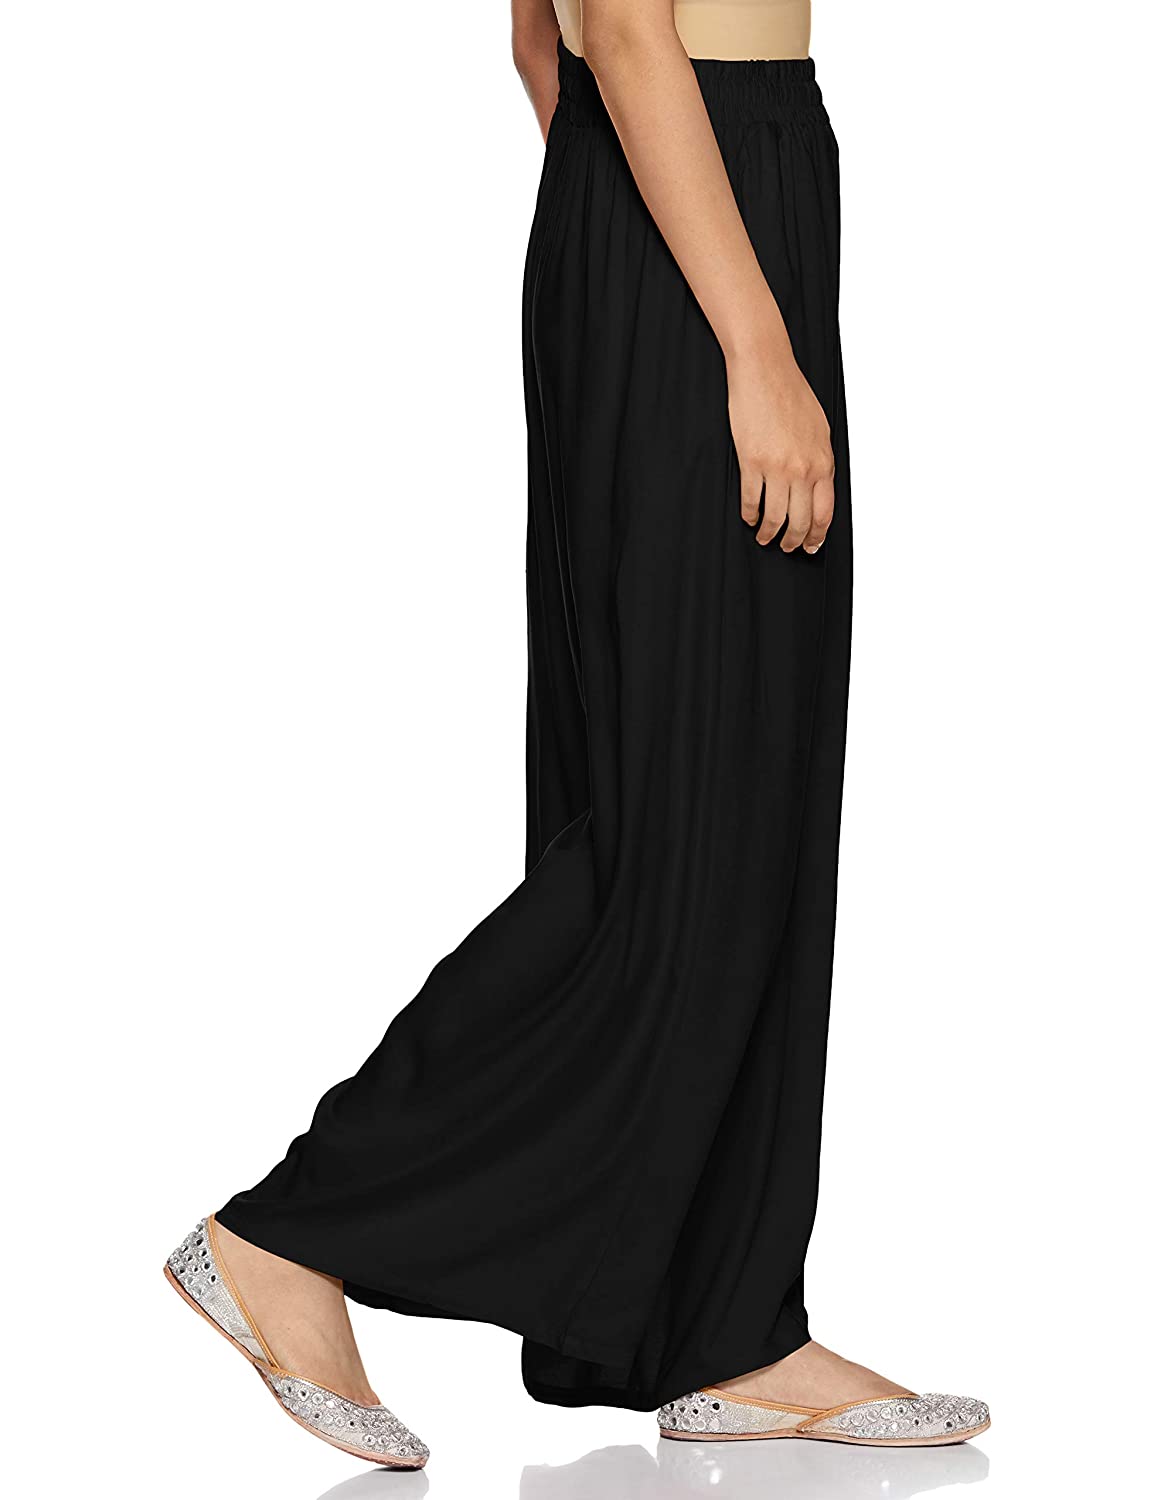 Buy online Black Cotton Pant for women and girls at best price at bibain   BOTTOMW14910SS22BLK